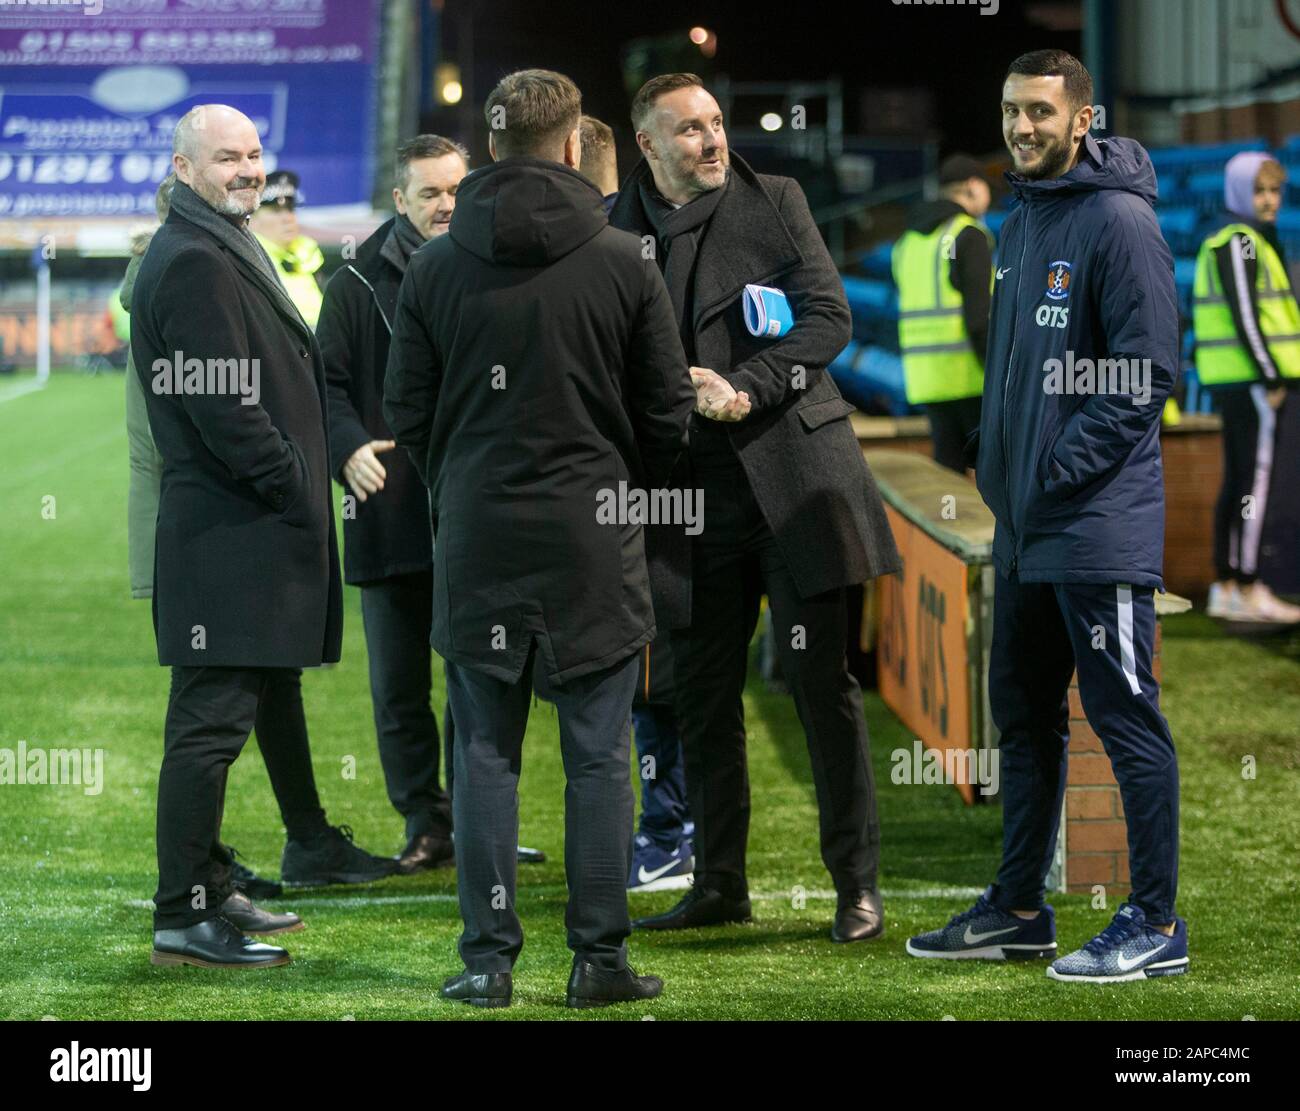 Kilmarnock’s Gary Dicker (right) alongside former manager and Scotland boss Steve Clarke (left) and Kris Boyd (centre) during the Ladbrokes Scottish Premiership match at Rugby Park, Kilmarnock. Stock Photo